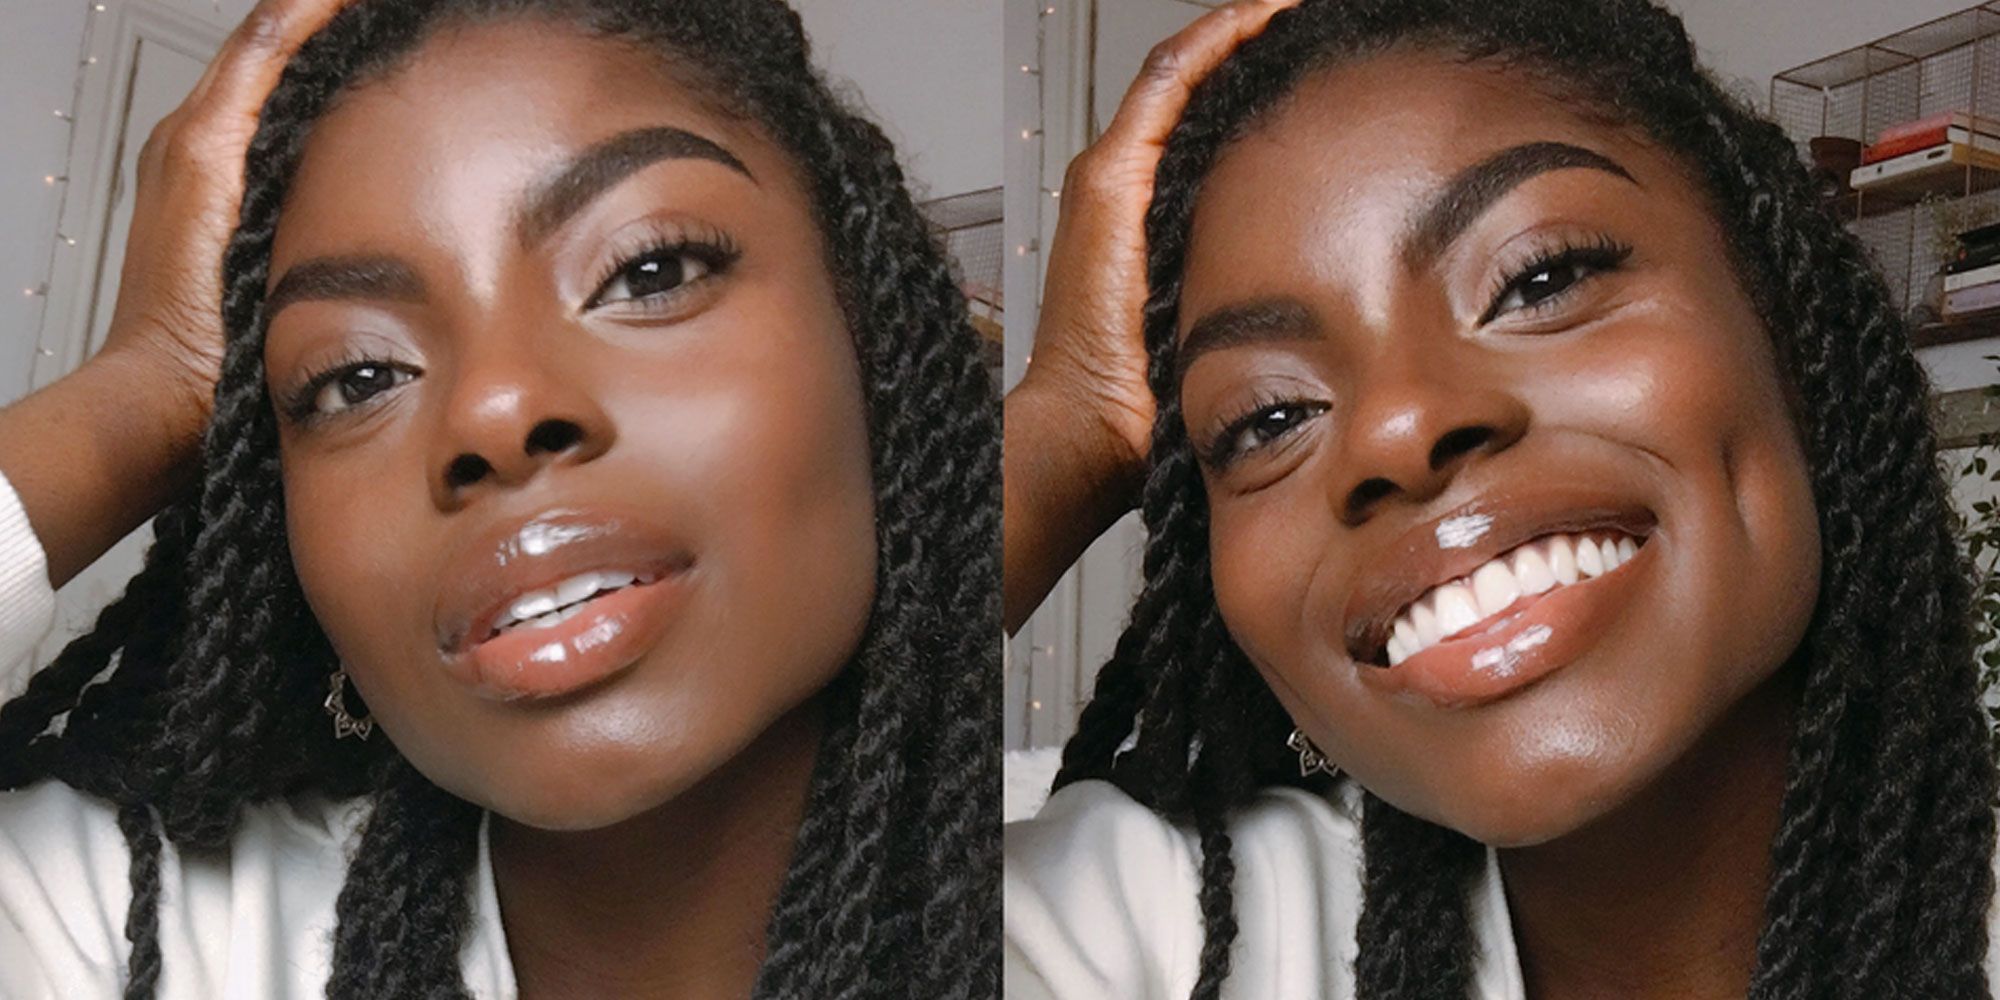 Woman's Skin Going Viral on Reddit for Looking So Smooth - Michele Manteaw Makeup Tutorials